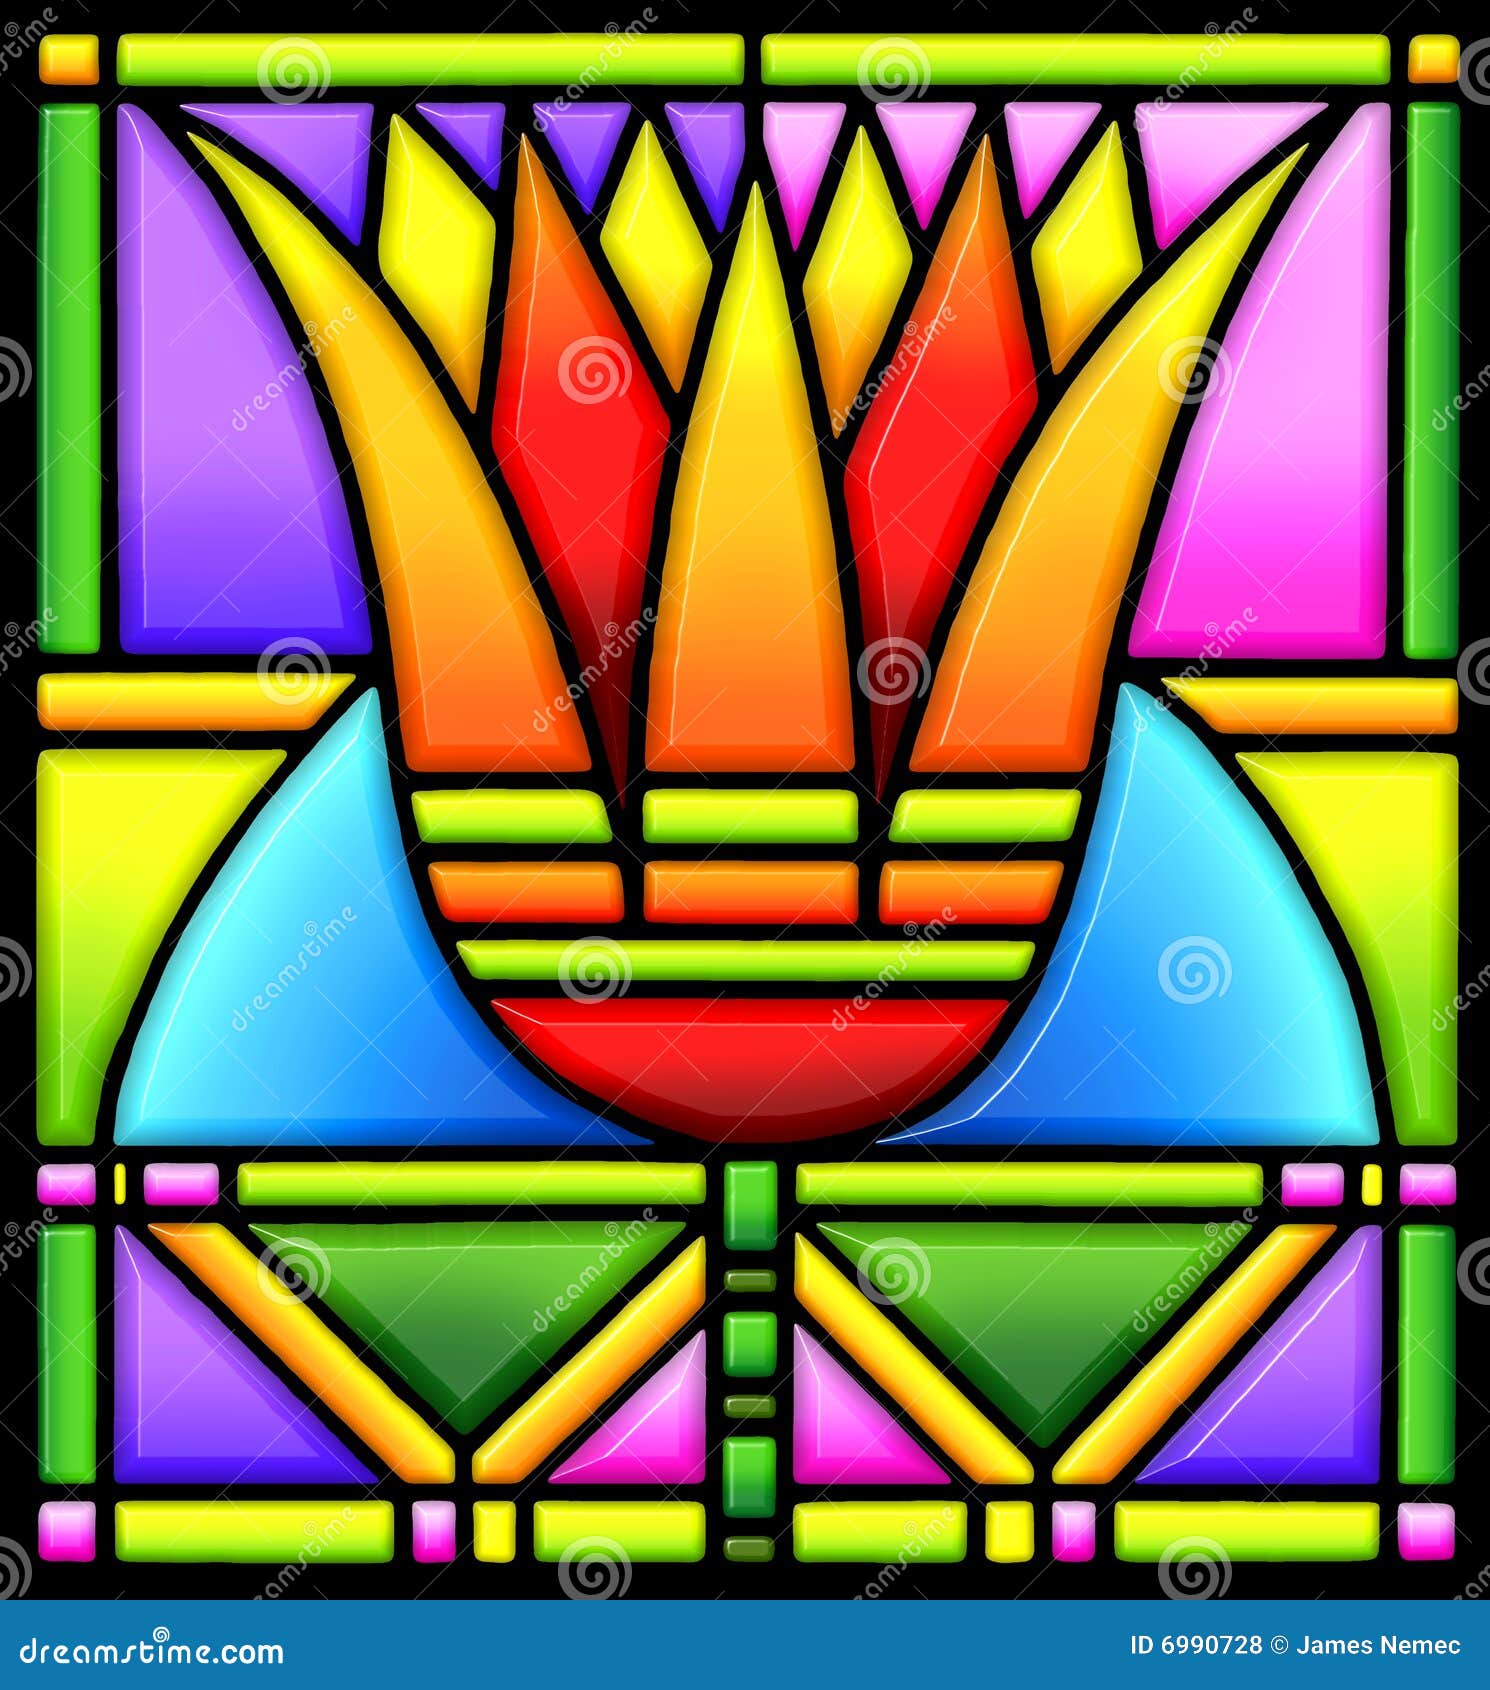 stained glass clipart - photo #14